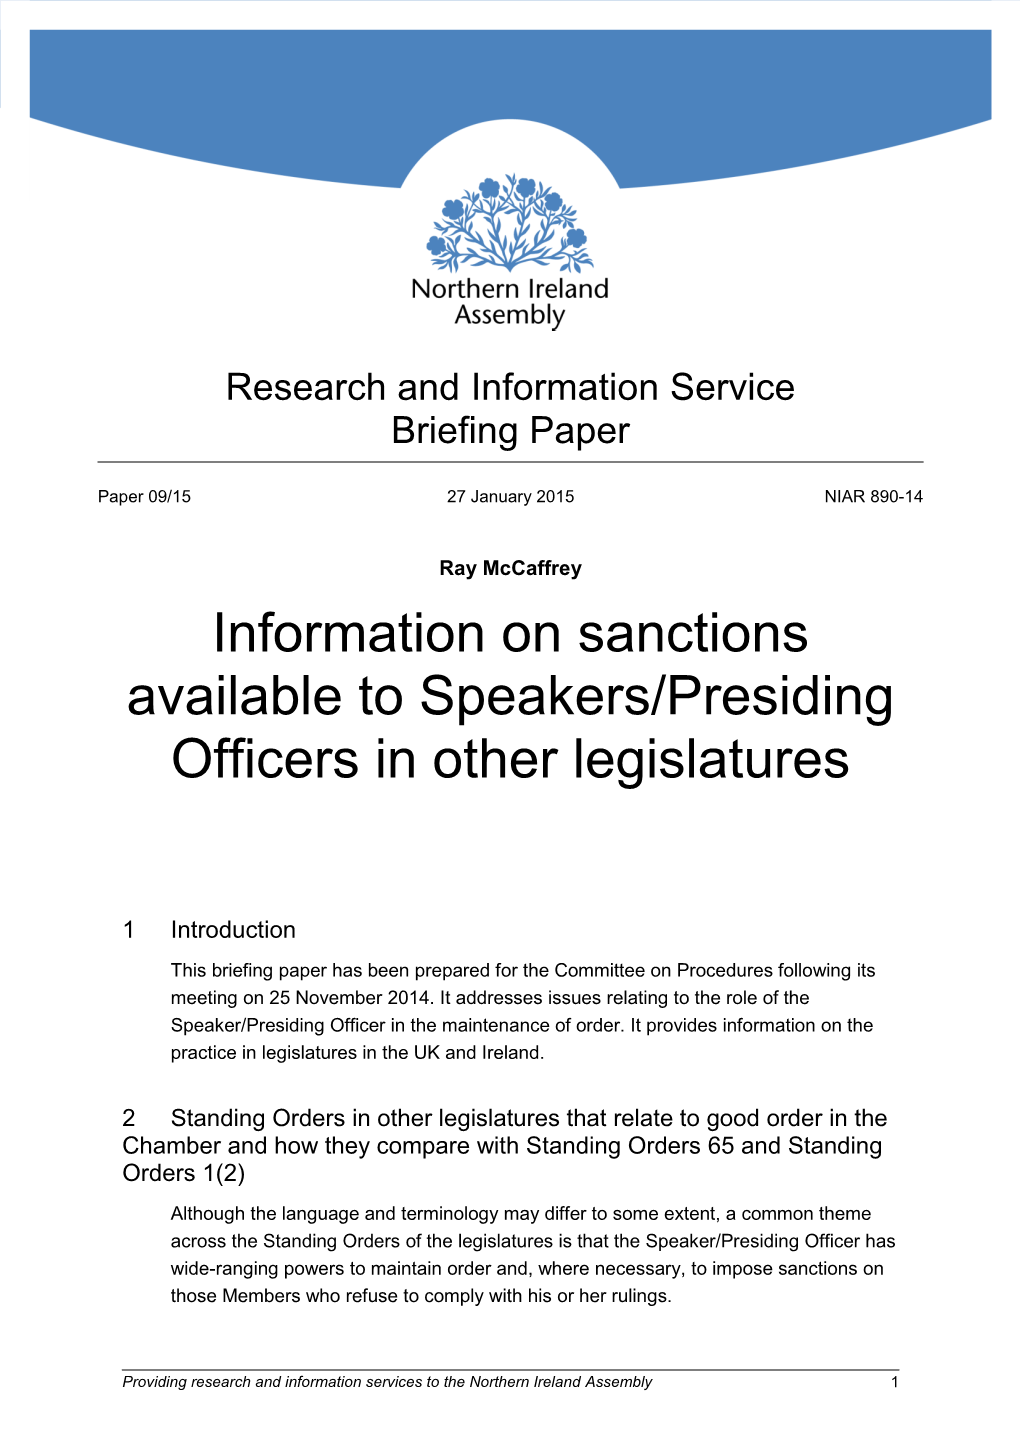 Information on Sanctions Available to Speakers/Presiding Officers in Other Legislatures